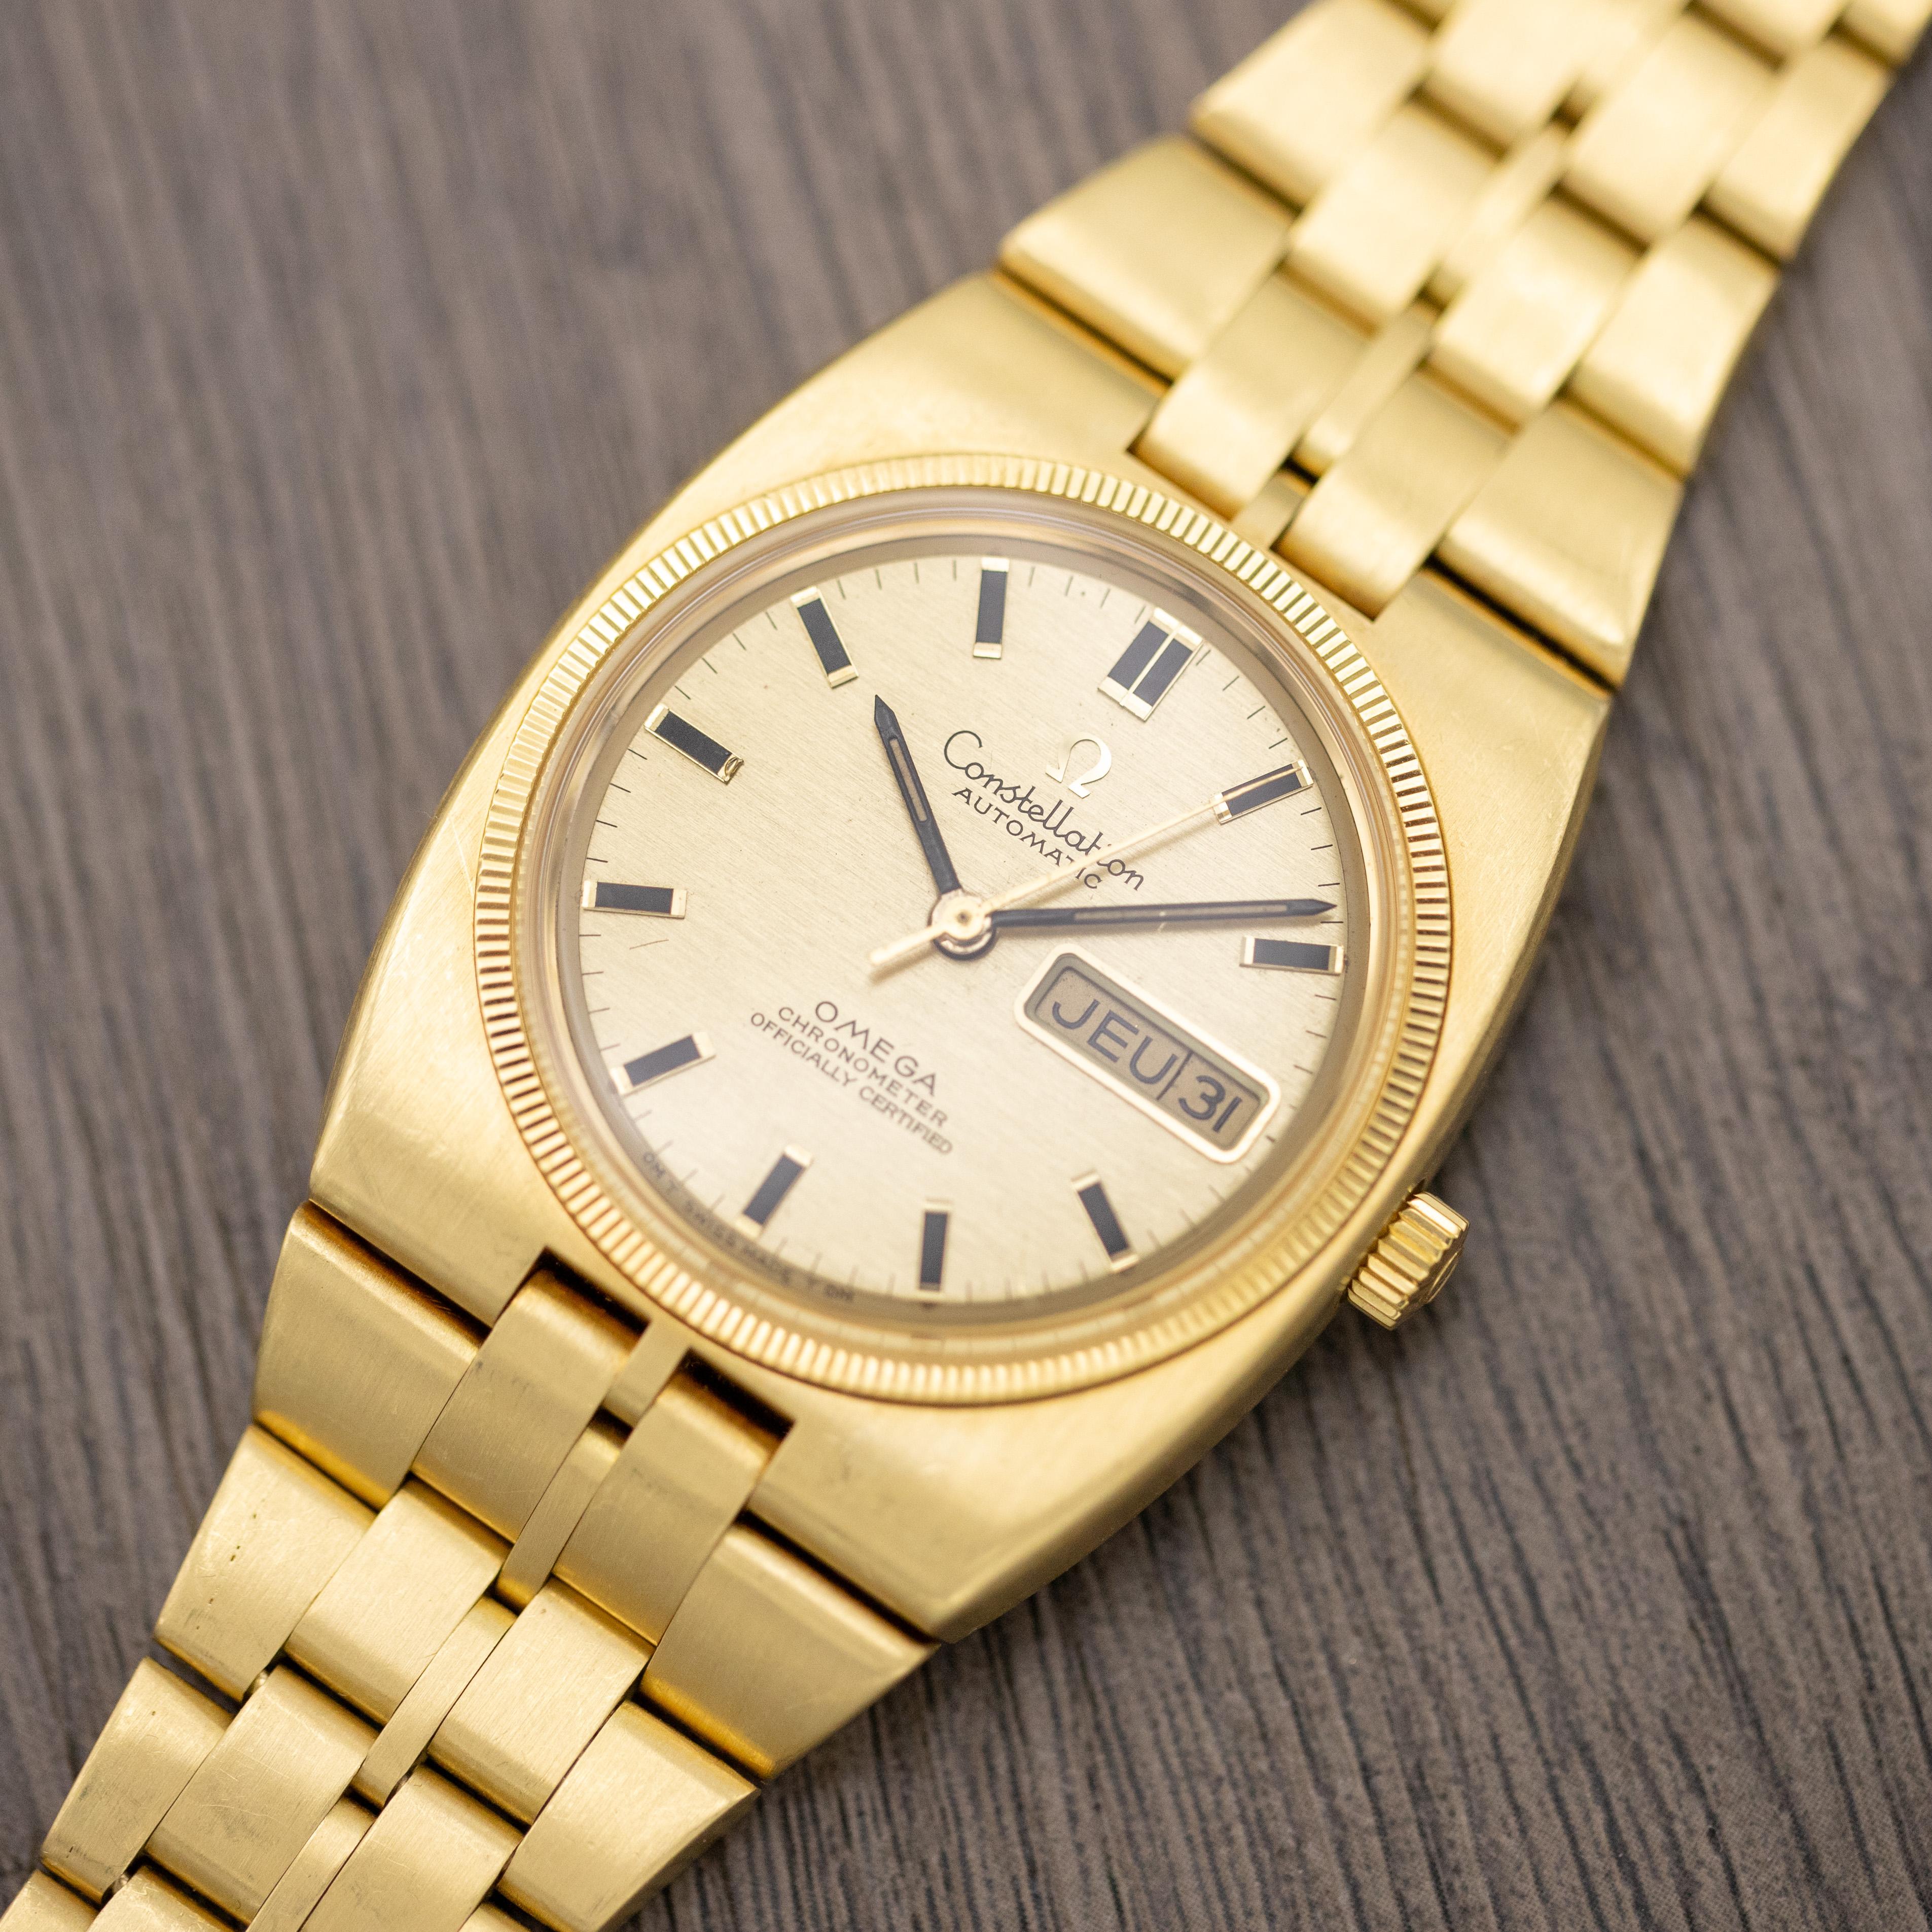 Omega Constellation Automatic Chronometer Day-Date - Vintage 18k Men's Watch For Sale 4